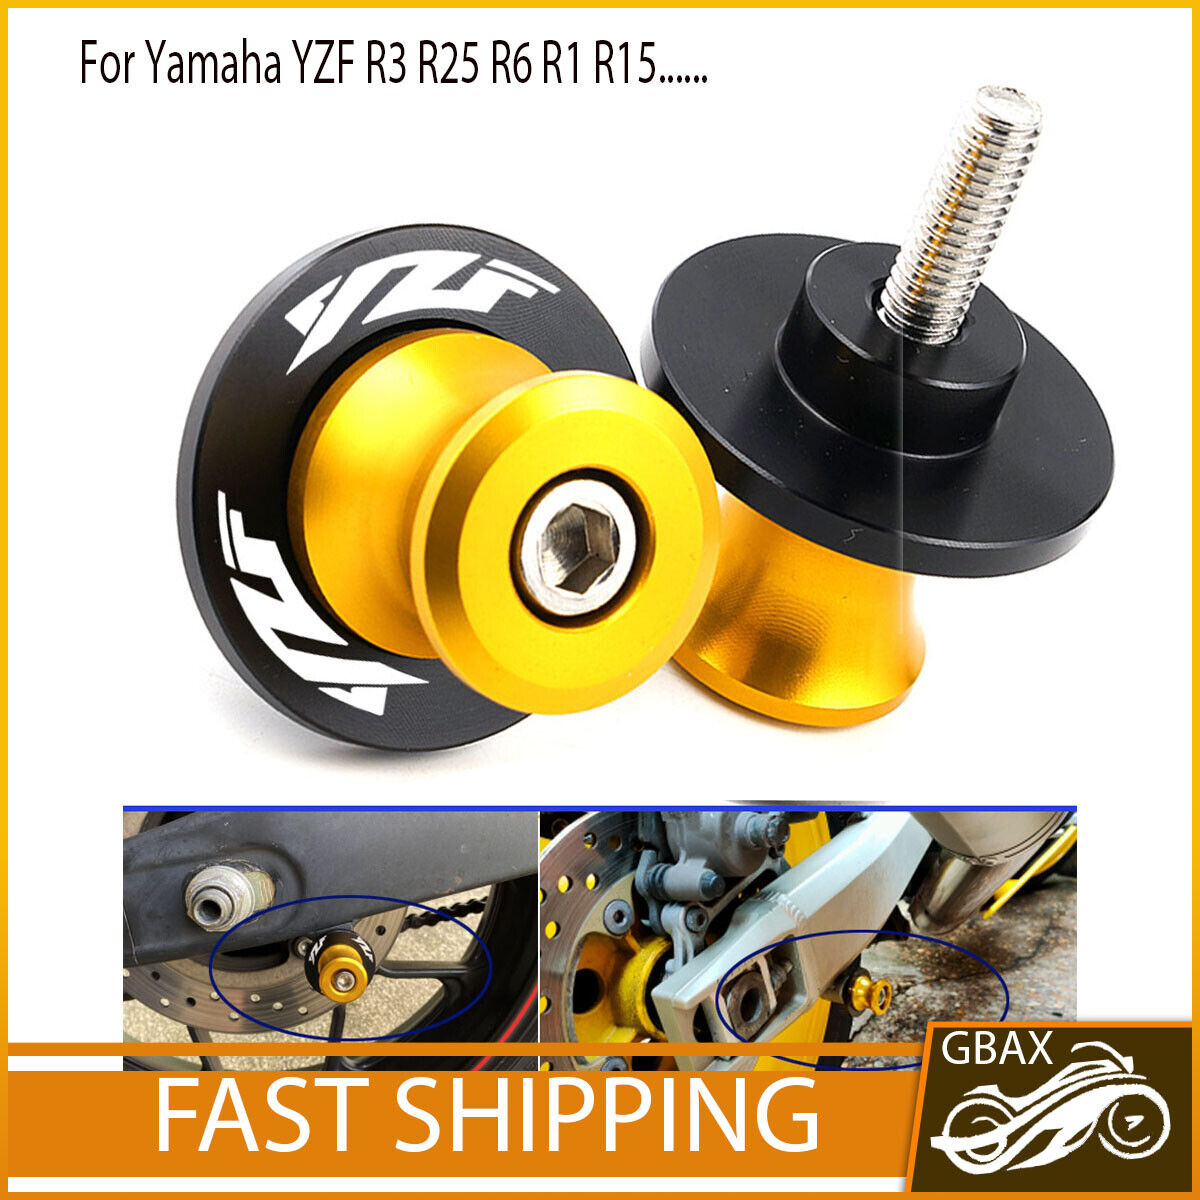 M6 Motorcycle Swingarm Spools Slider Stand Screws for Yamaha YZF R6 Left & Right